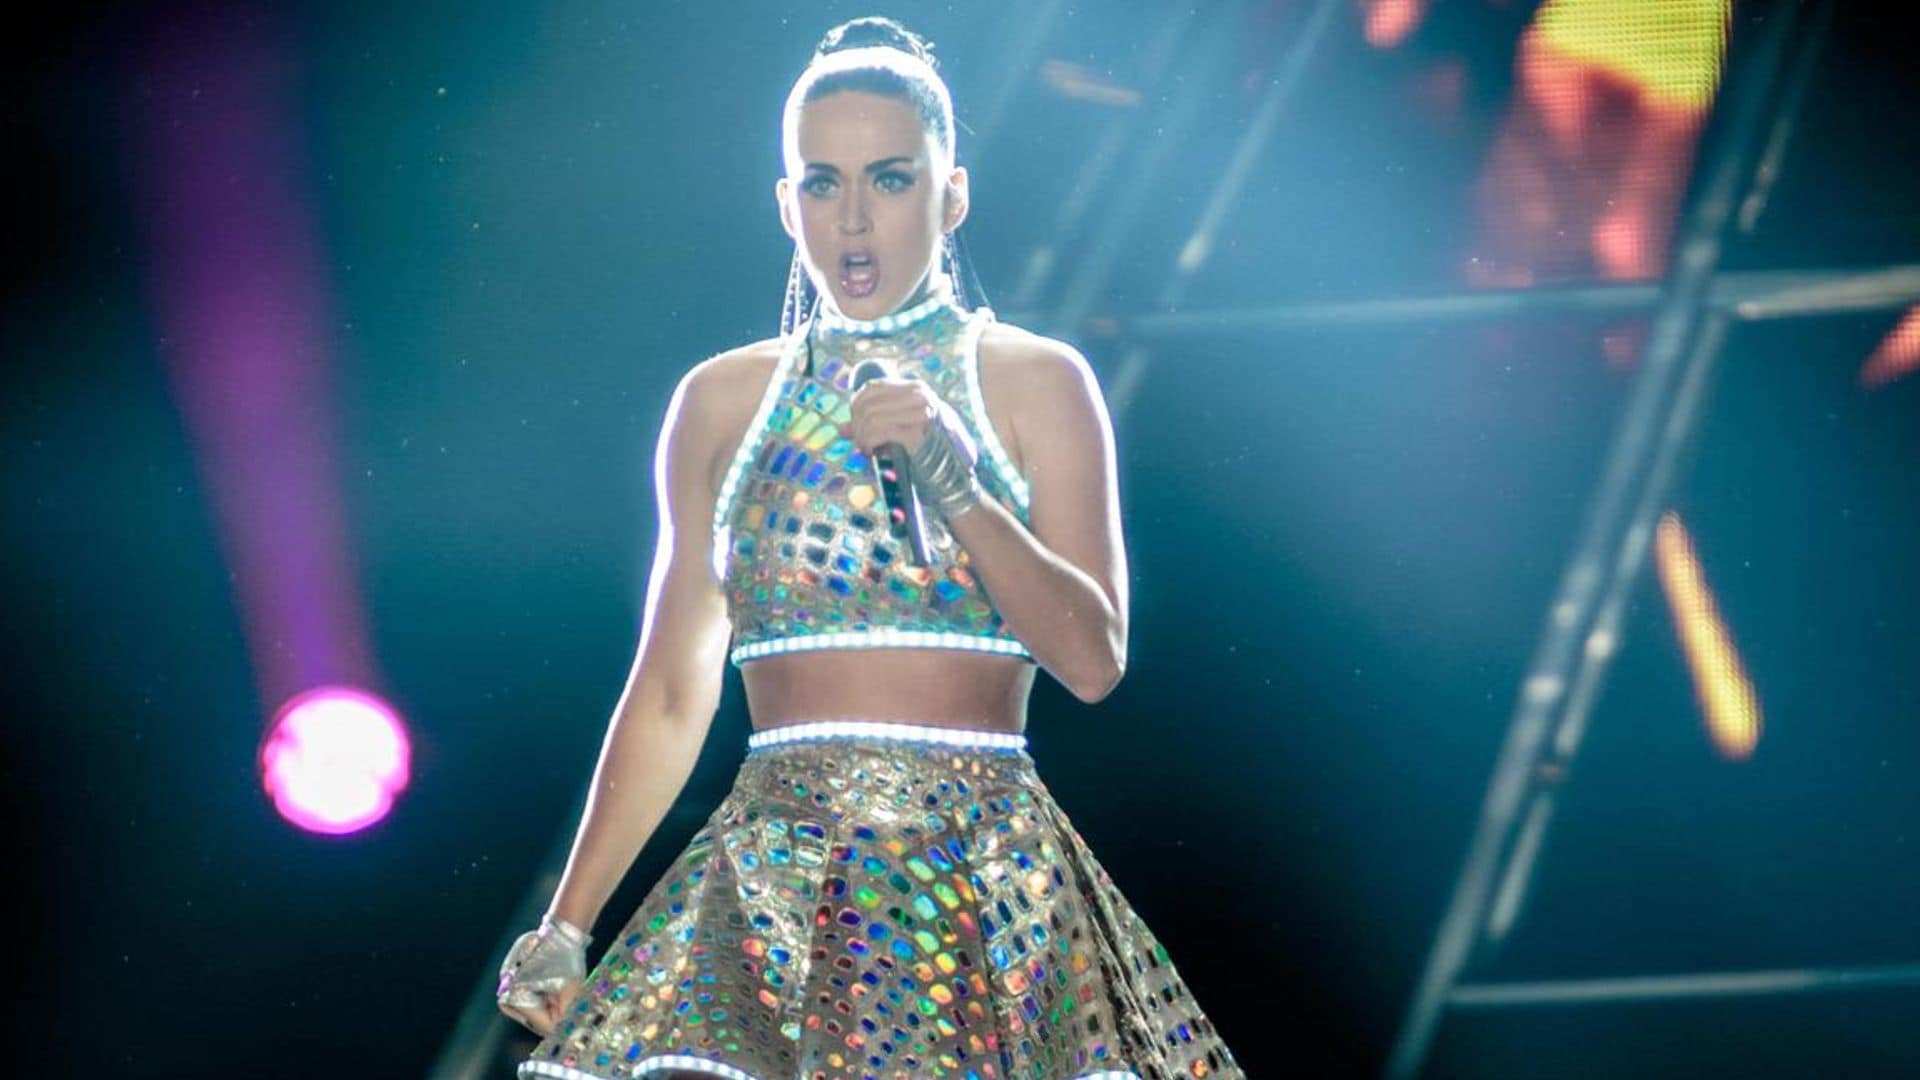 Katy Perry reveled she had "to change a couple of keys" because her pregnancy has altered her vocals.